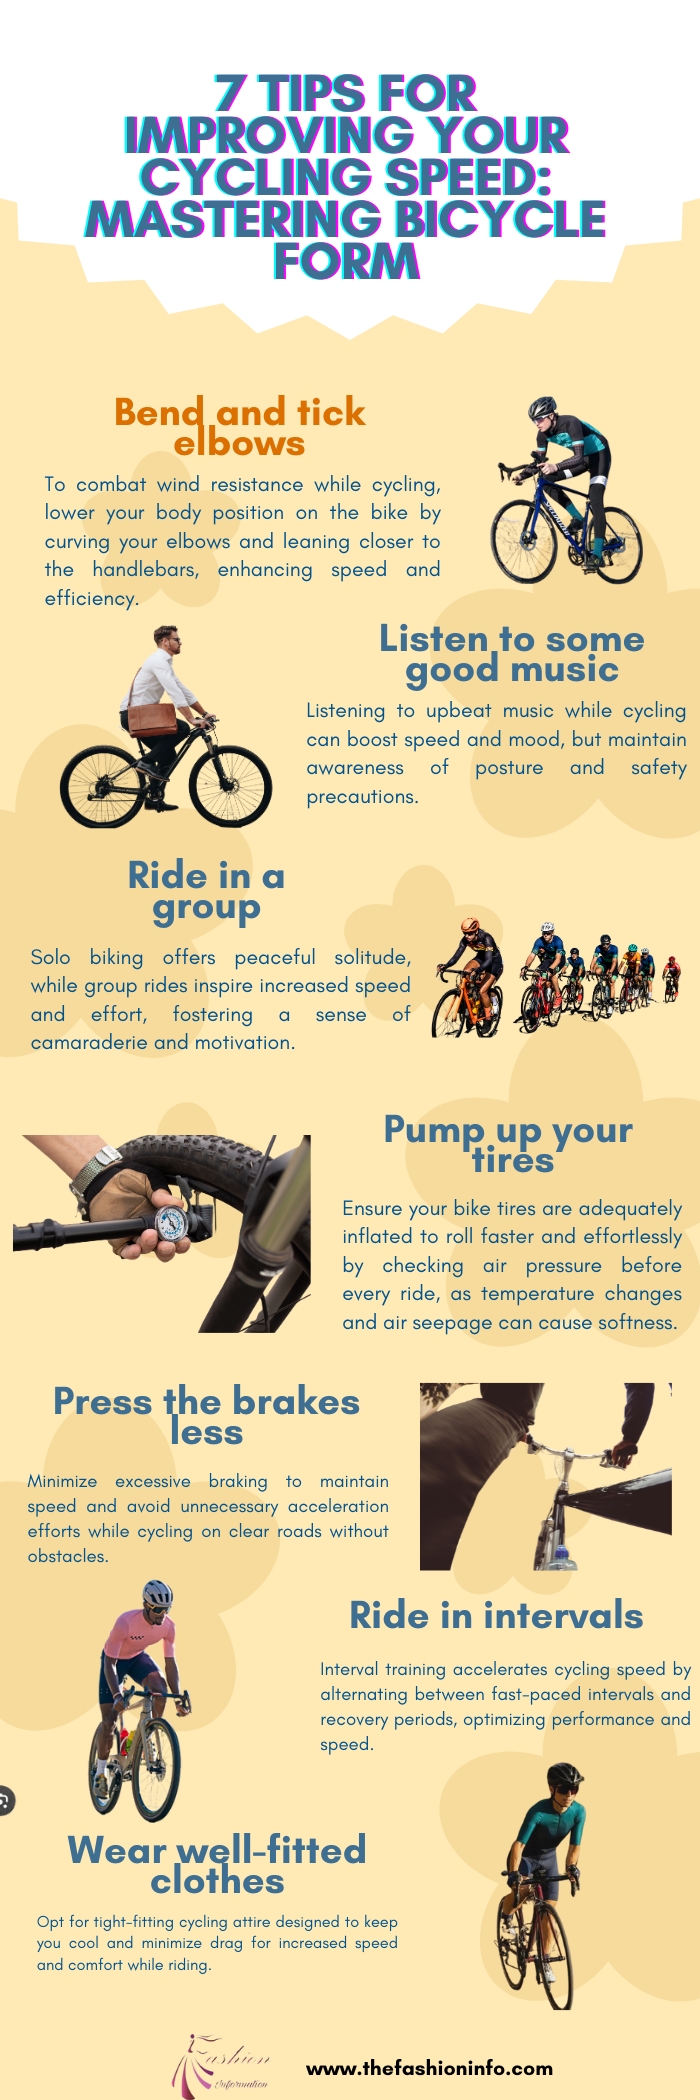 7 Tips for Improving Your Cycling Speed Mastering Bicycle Form